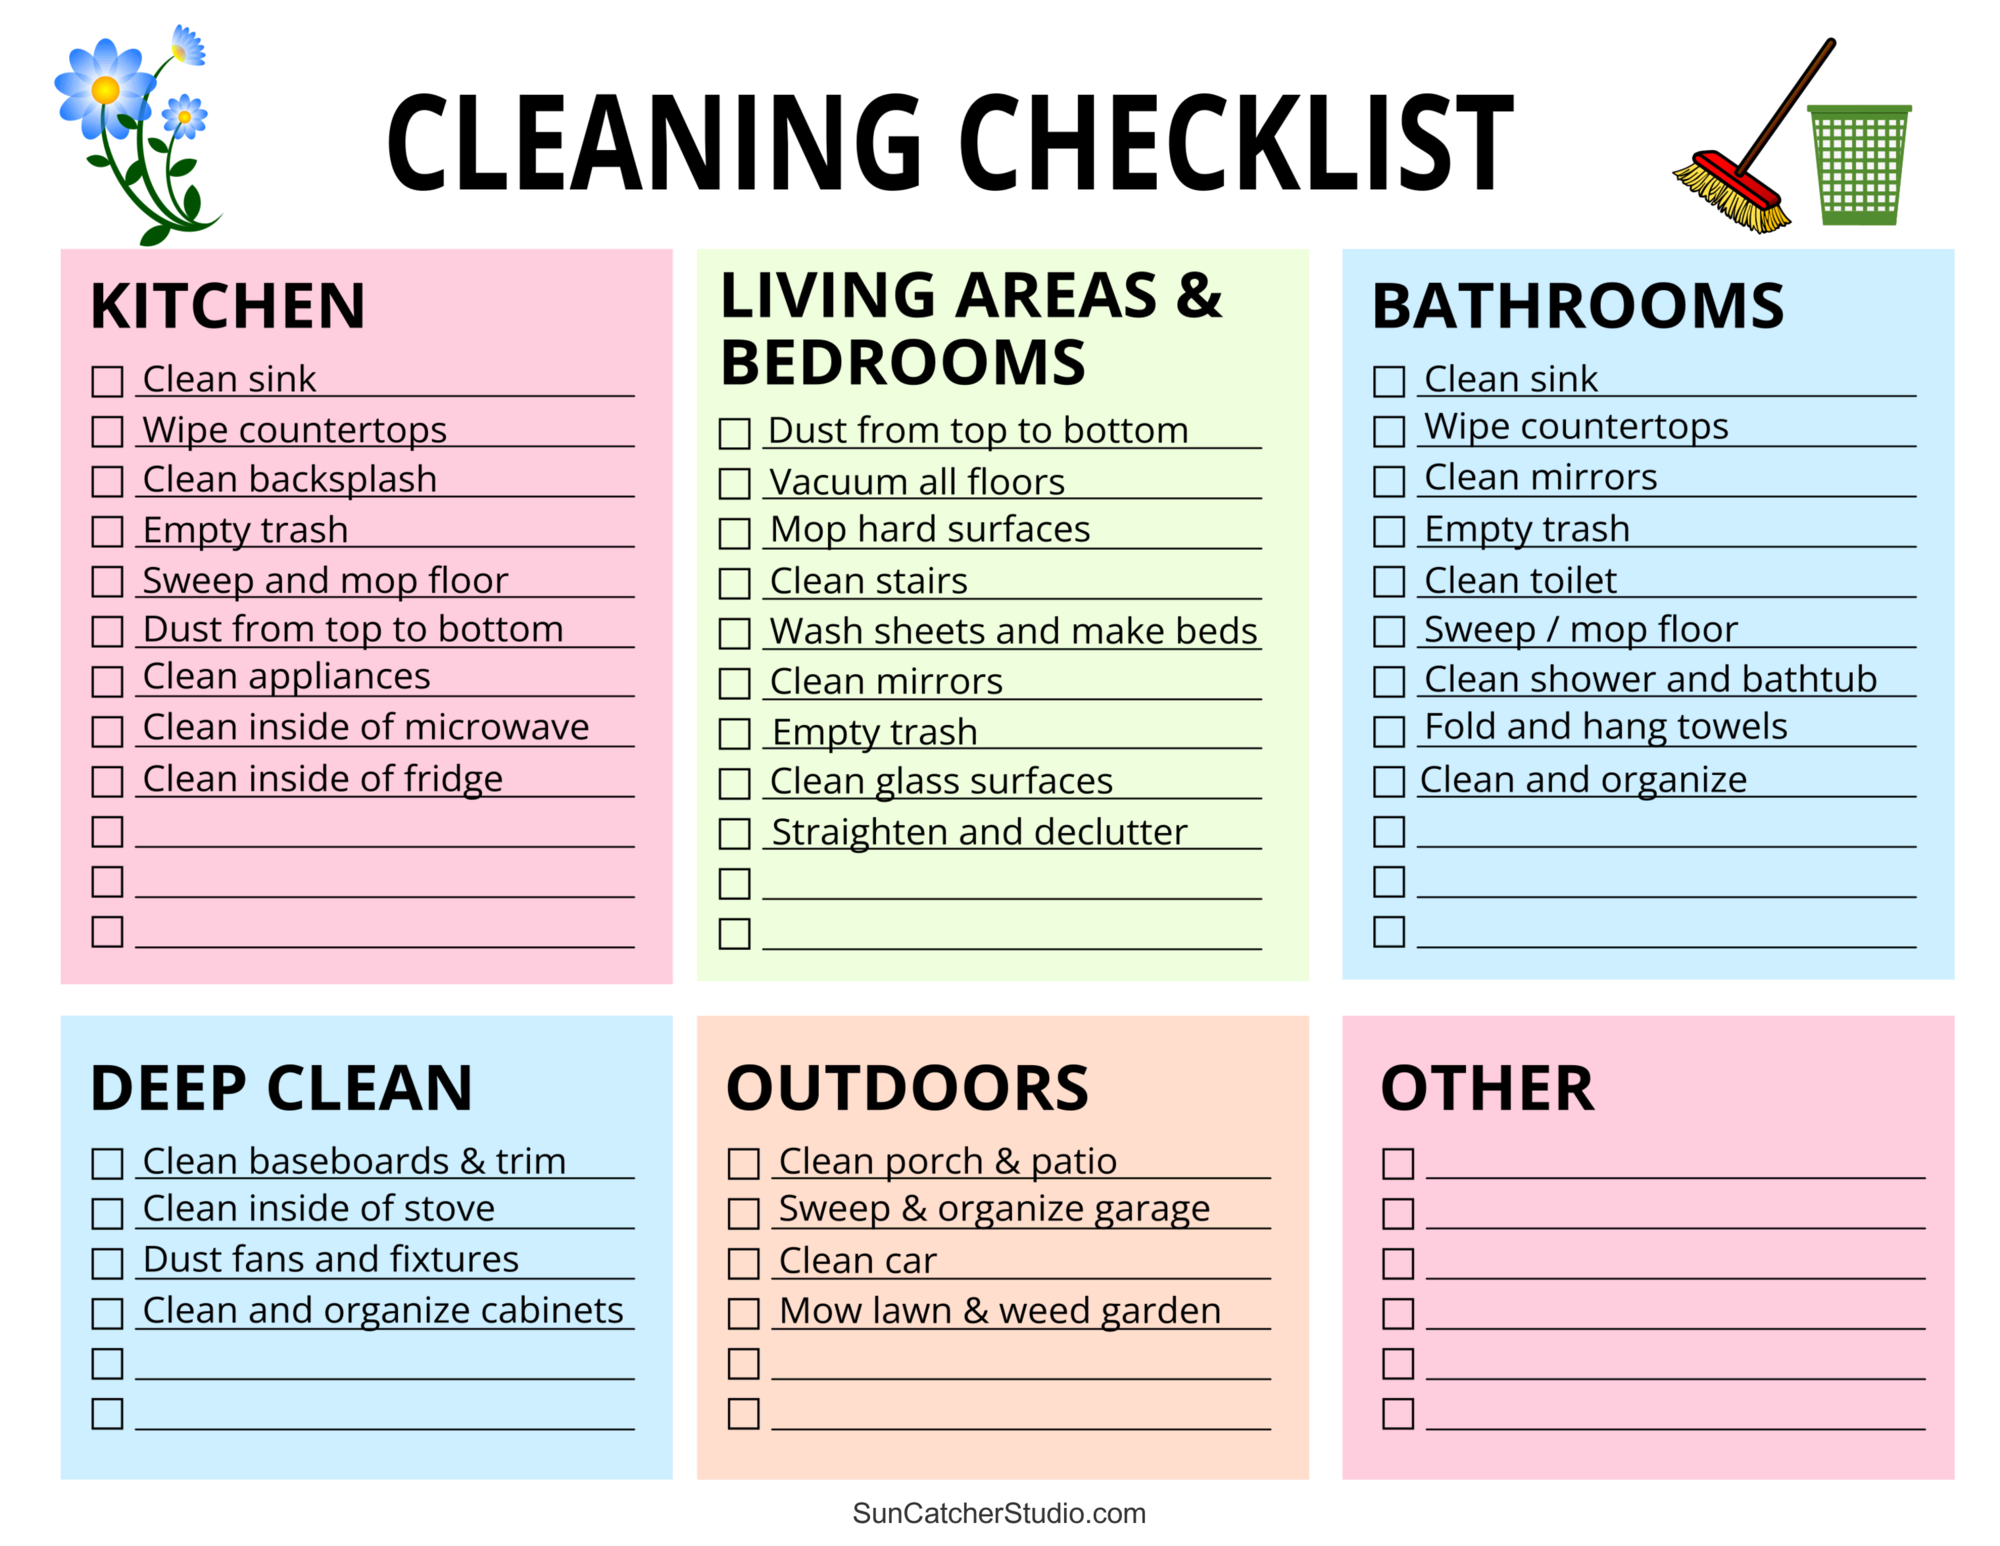 printable-cleaning-schedule-spring-daily-weekly-checklists-diy-projects-patterns